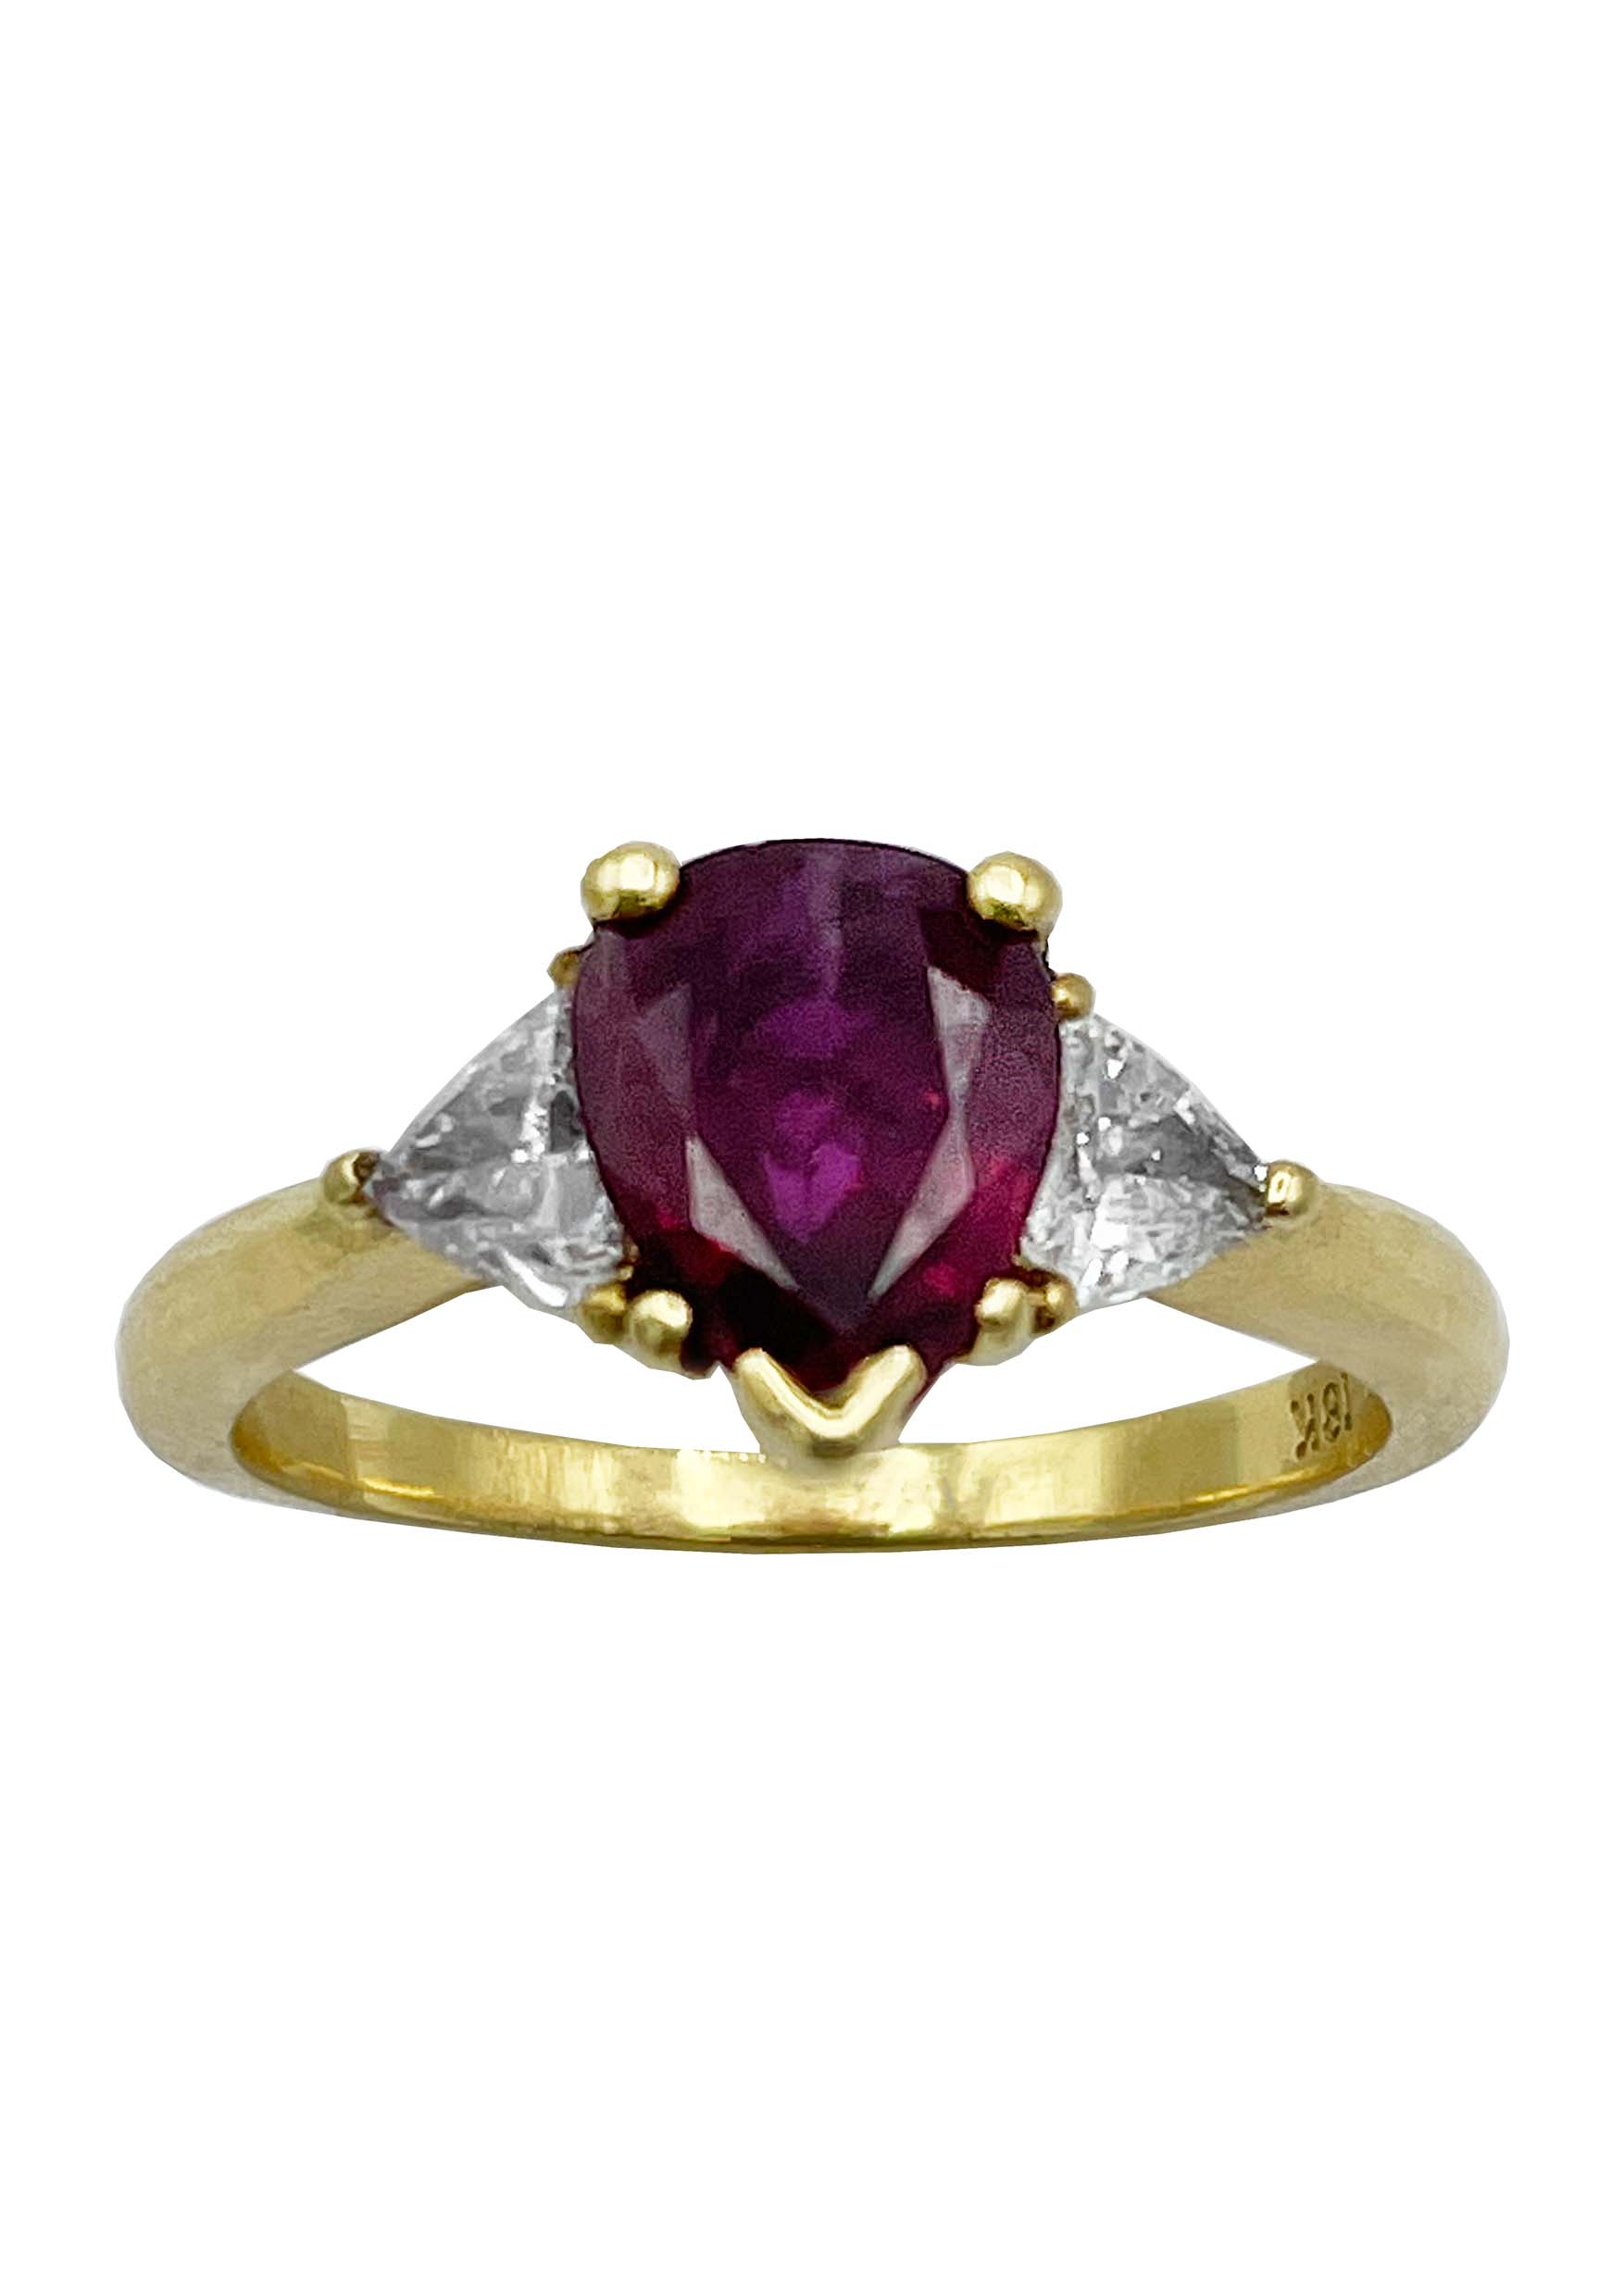 18k Yellow Gold Ring With Ruby and Diamonds Image